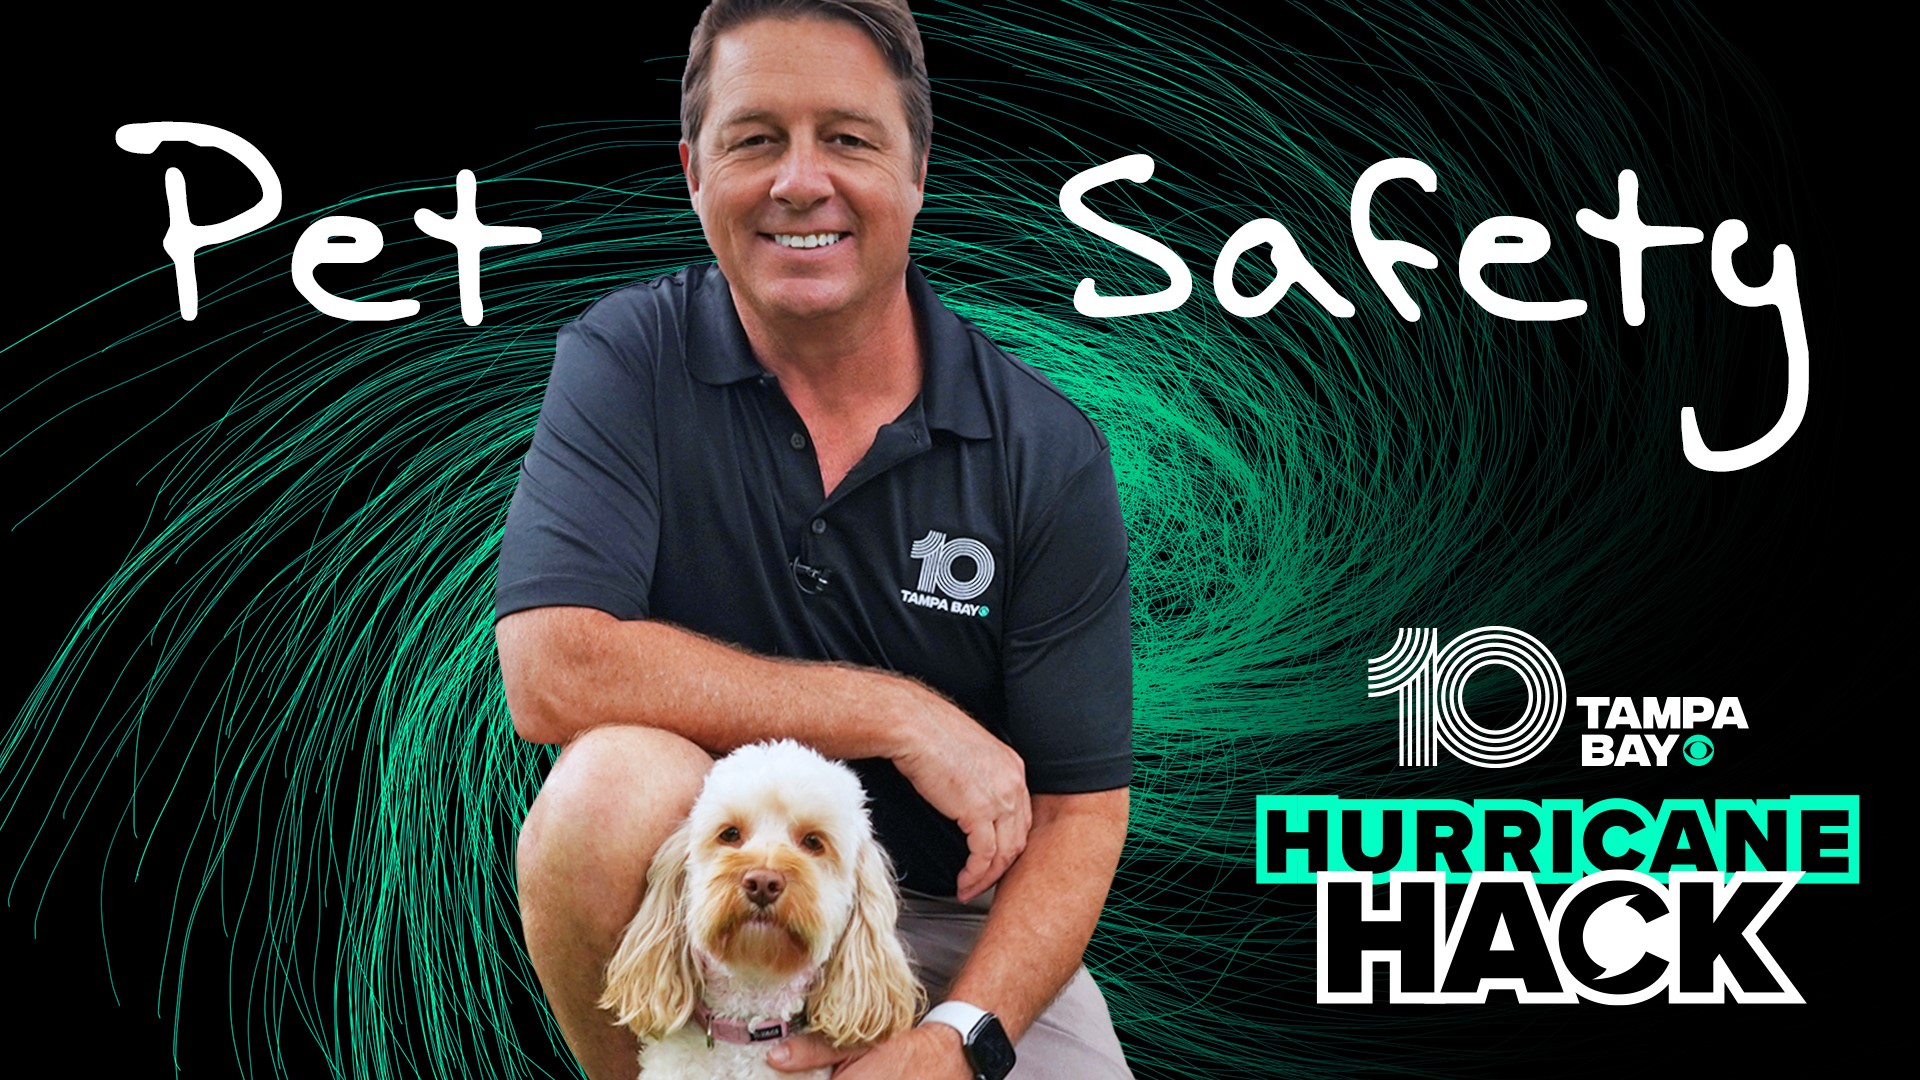 10 Tampa Bay Chief Meteorologist Bobby Deskins explains how to keep your pets comfortable during a hurricane.